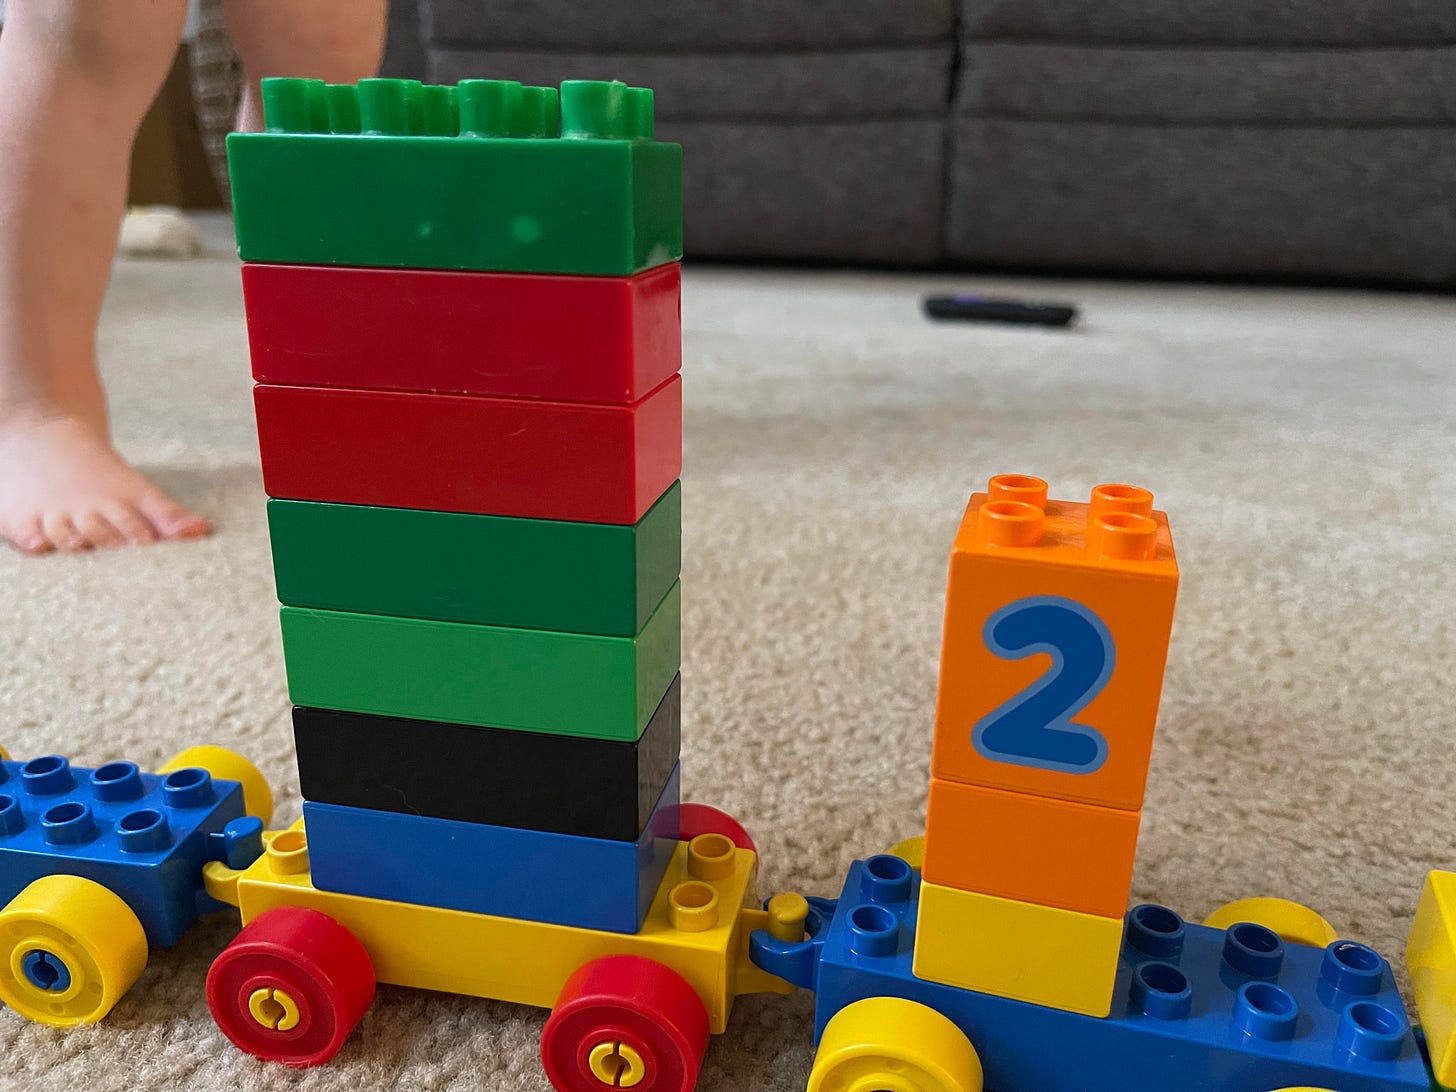 A smaller version of the “elevator train” featuring toddler feet